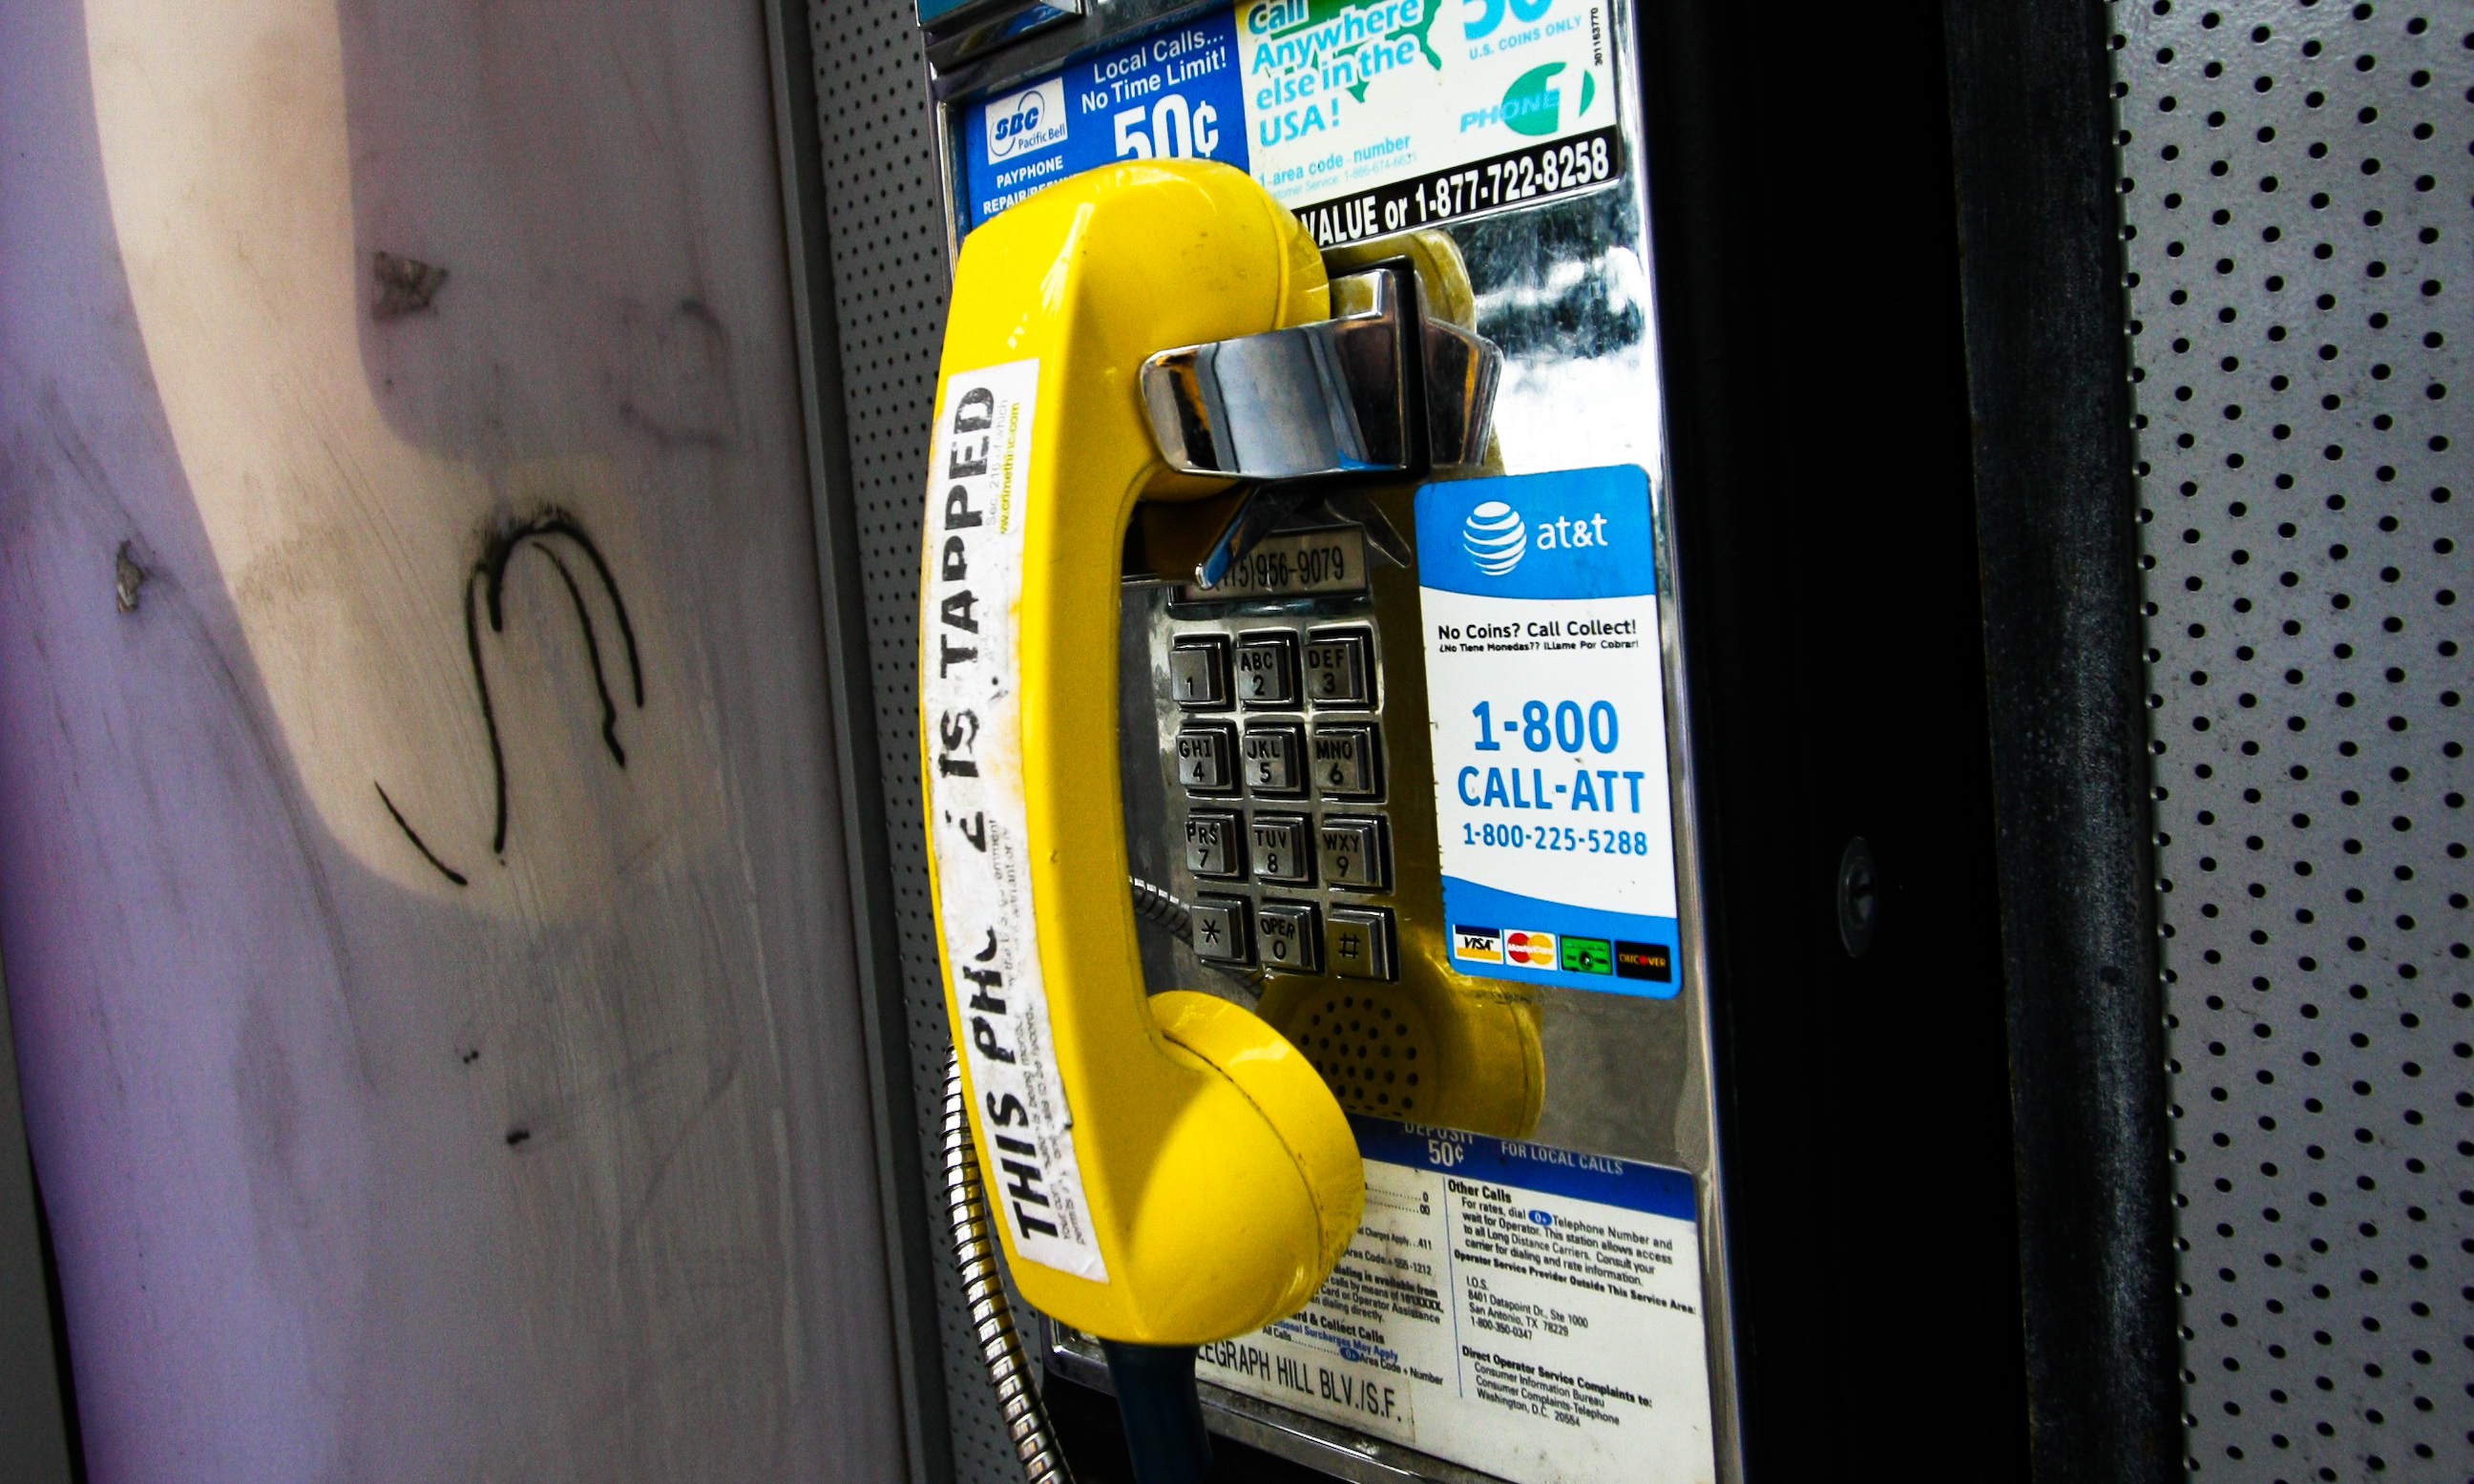 File This Phone Is Tapped Payphone Jpg Wikimedia Commons